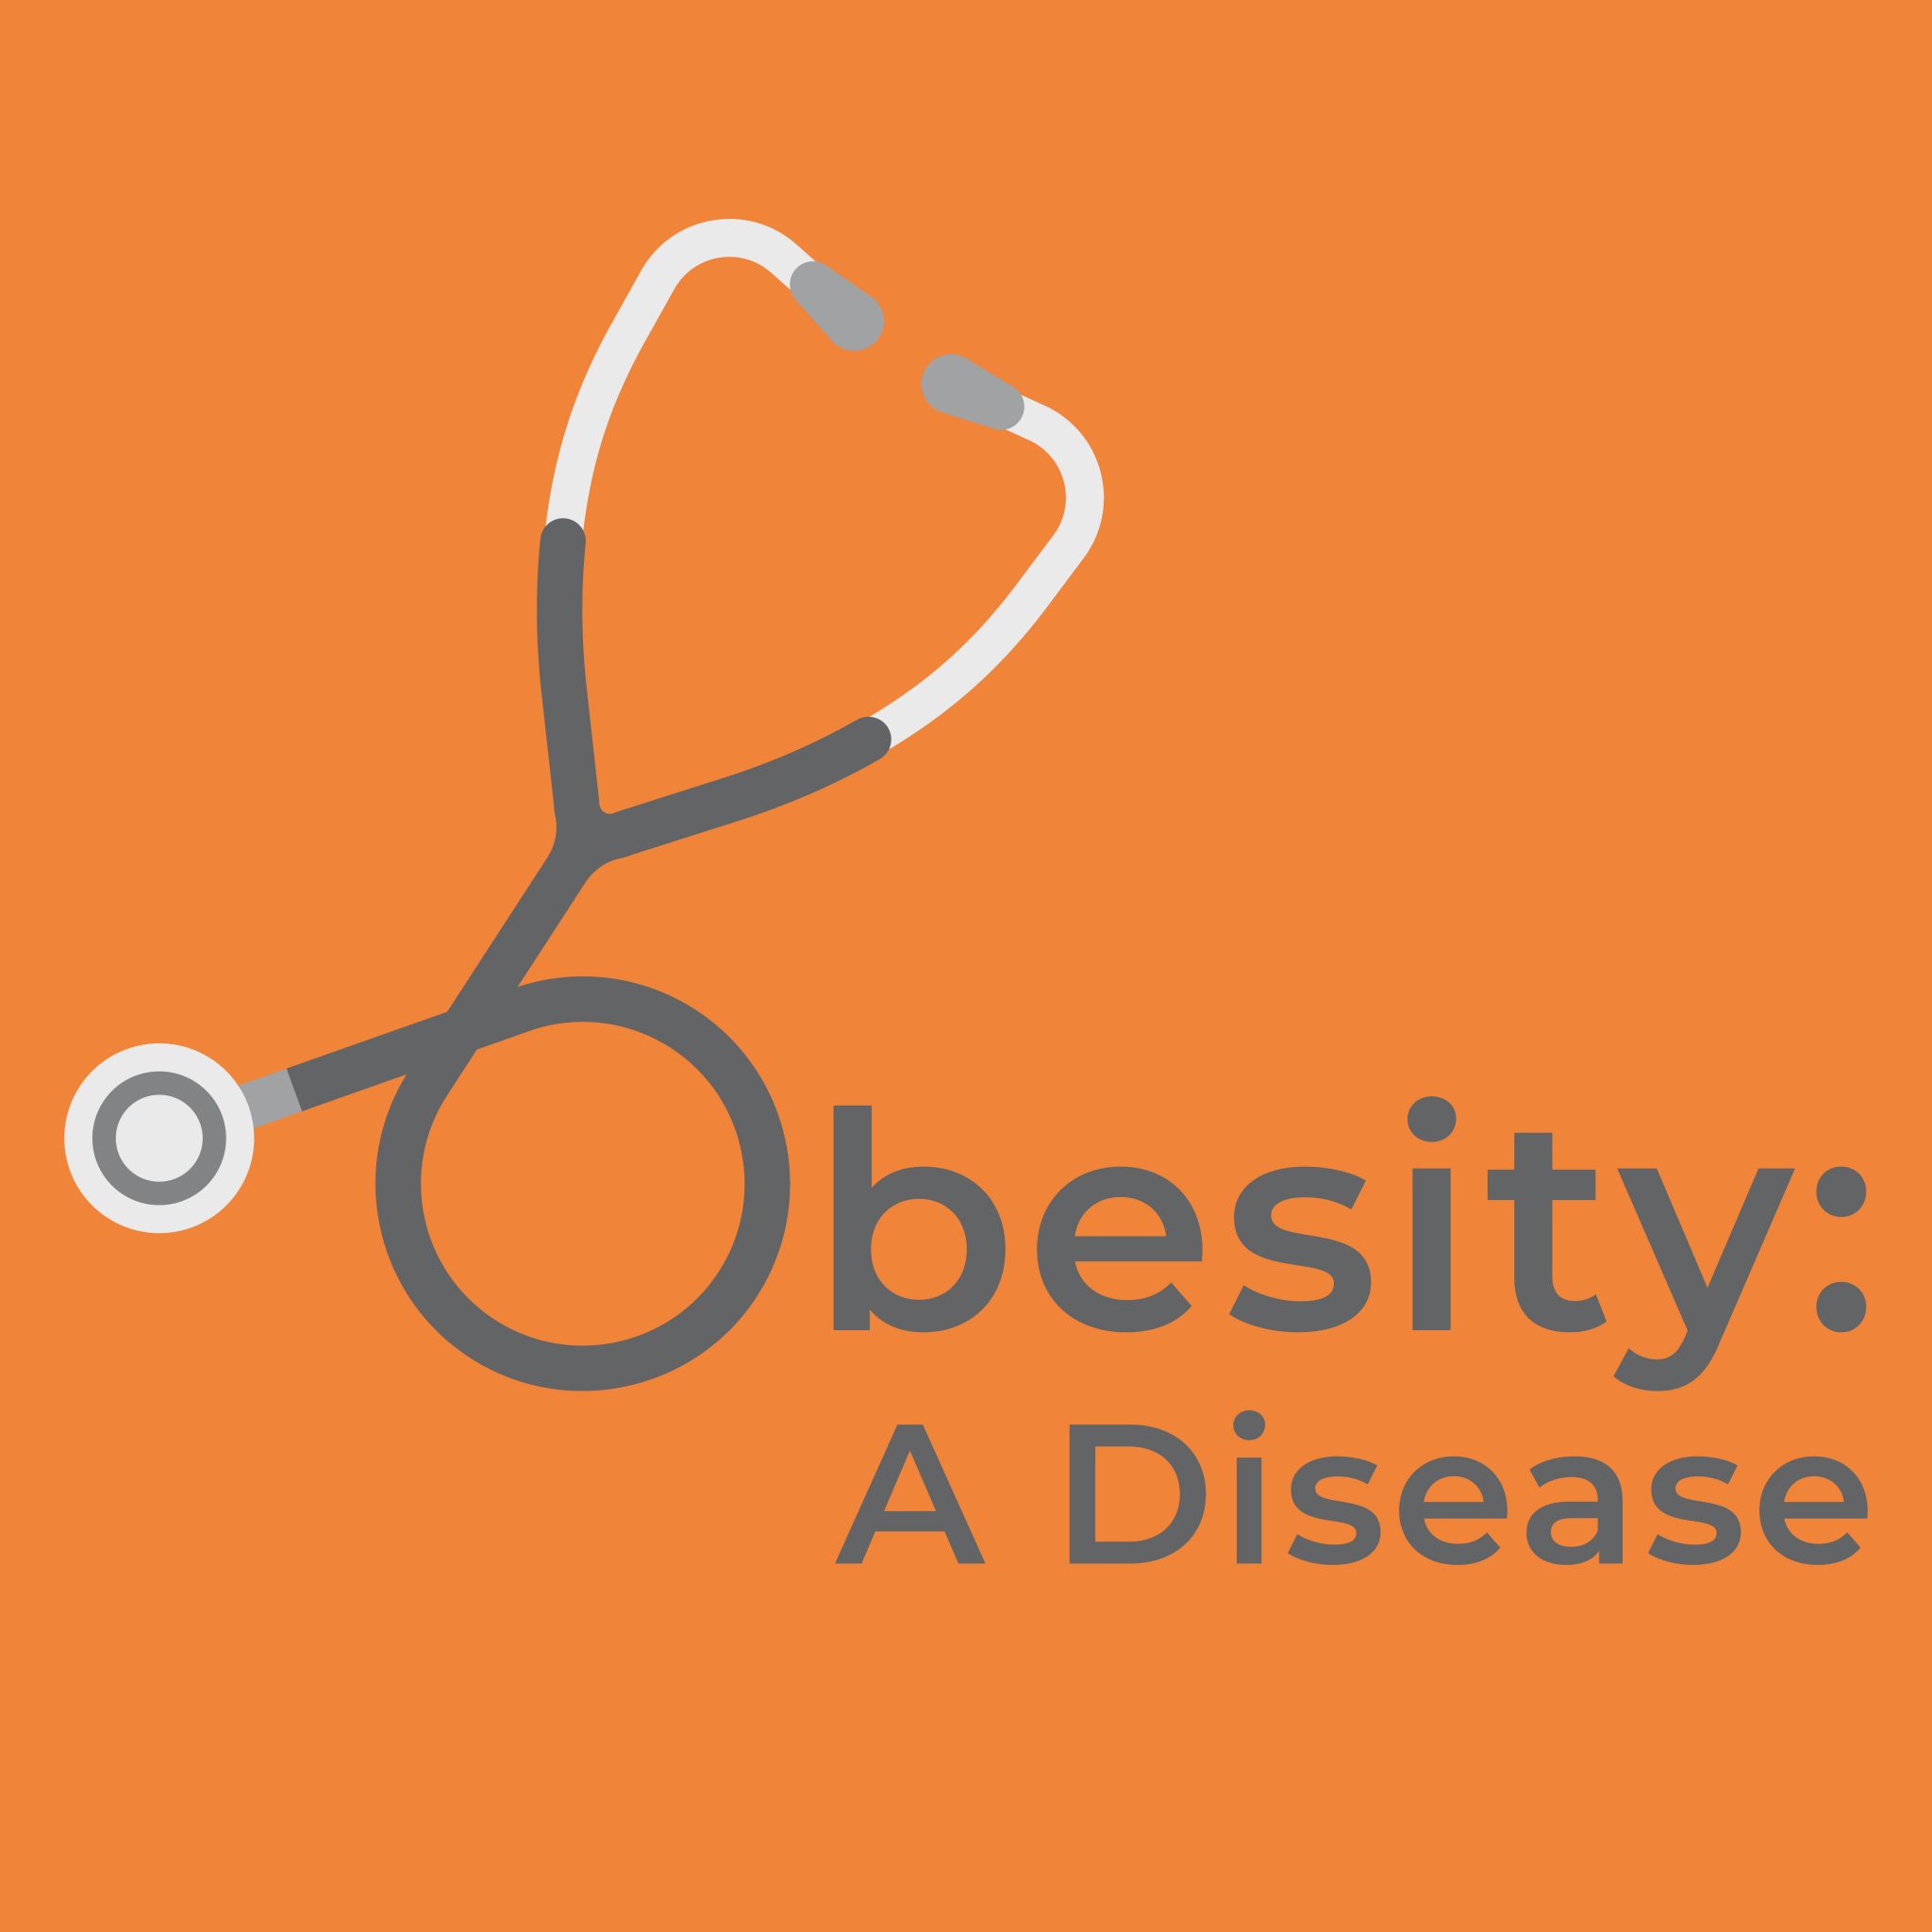 Episode 73: Article Reviews: Clinical Practice Statements for the Management of Obesity - Nutrition and Physical Activity, Part 2 of 2: Body Composition